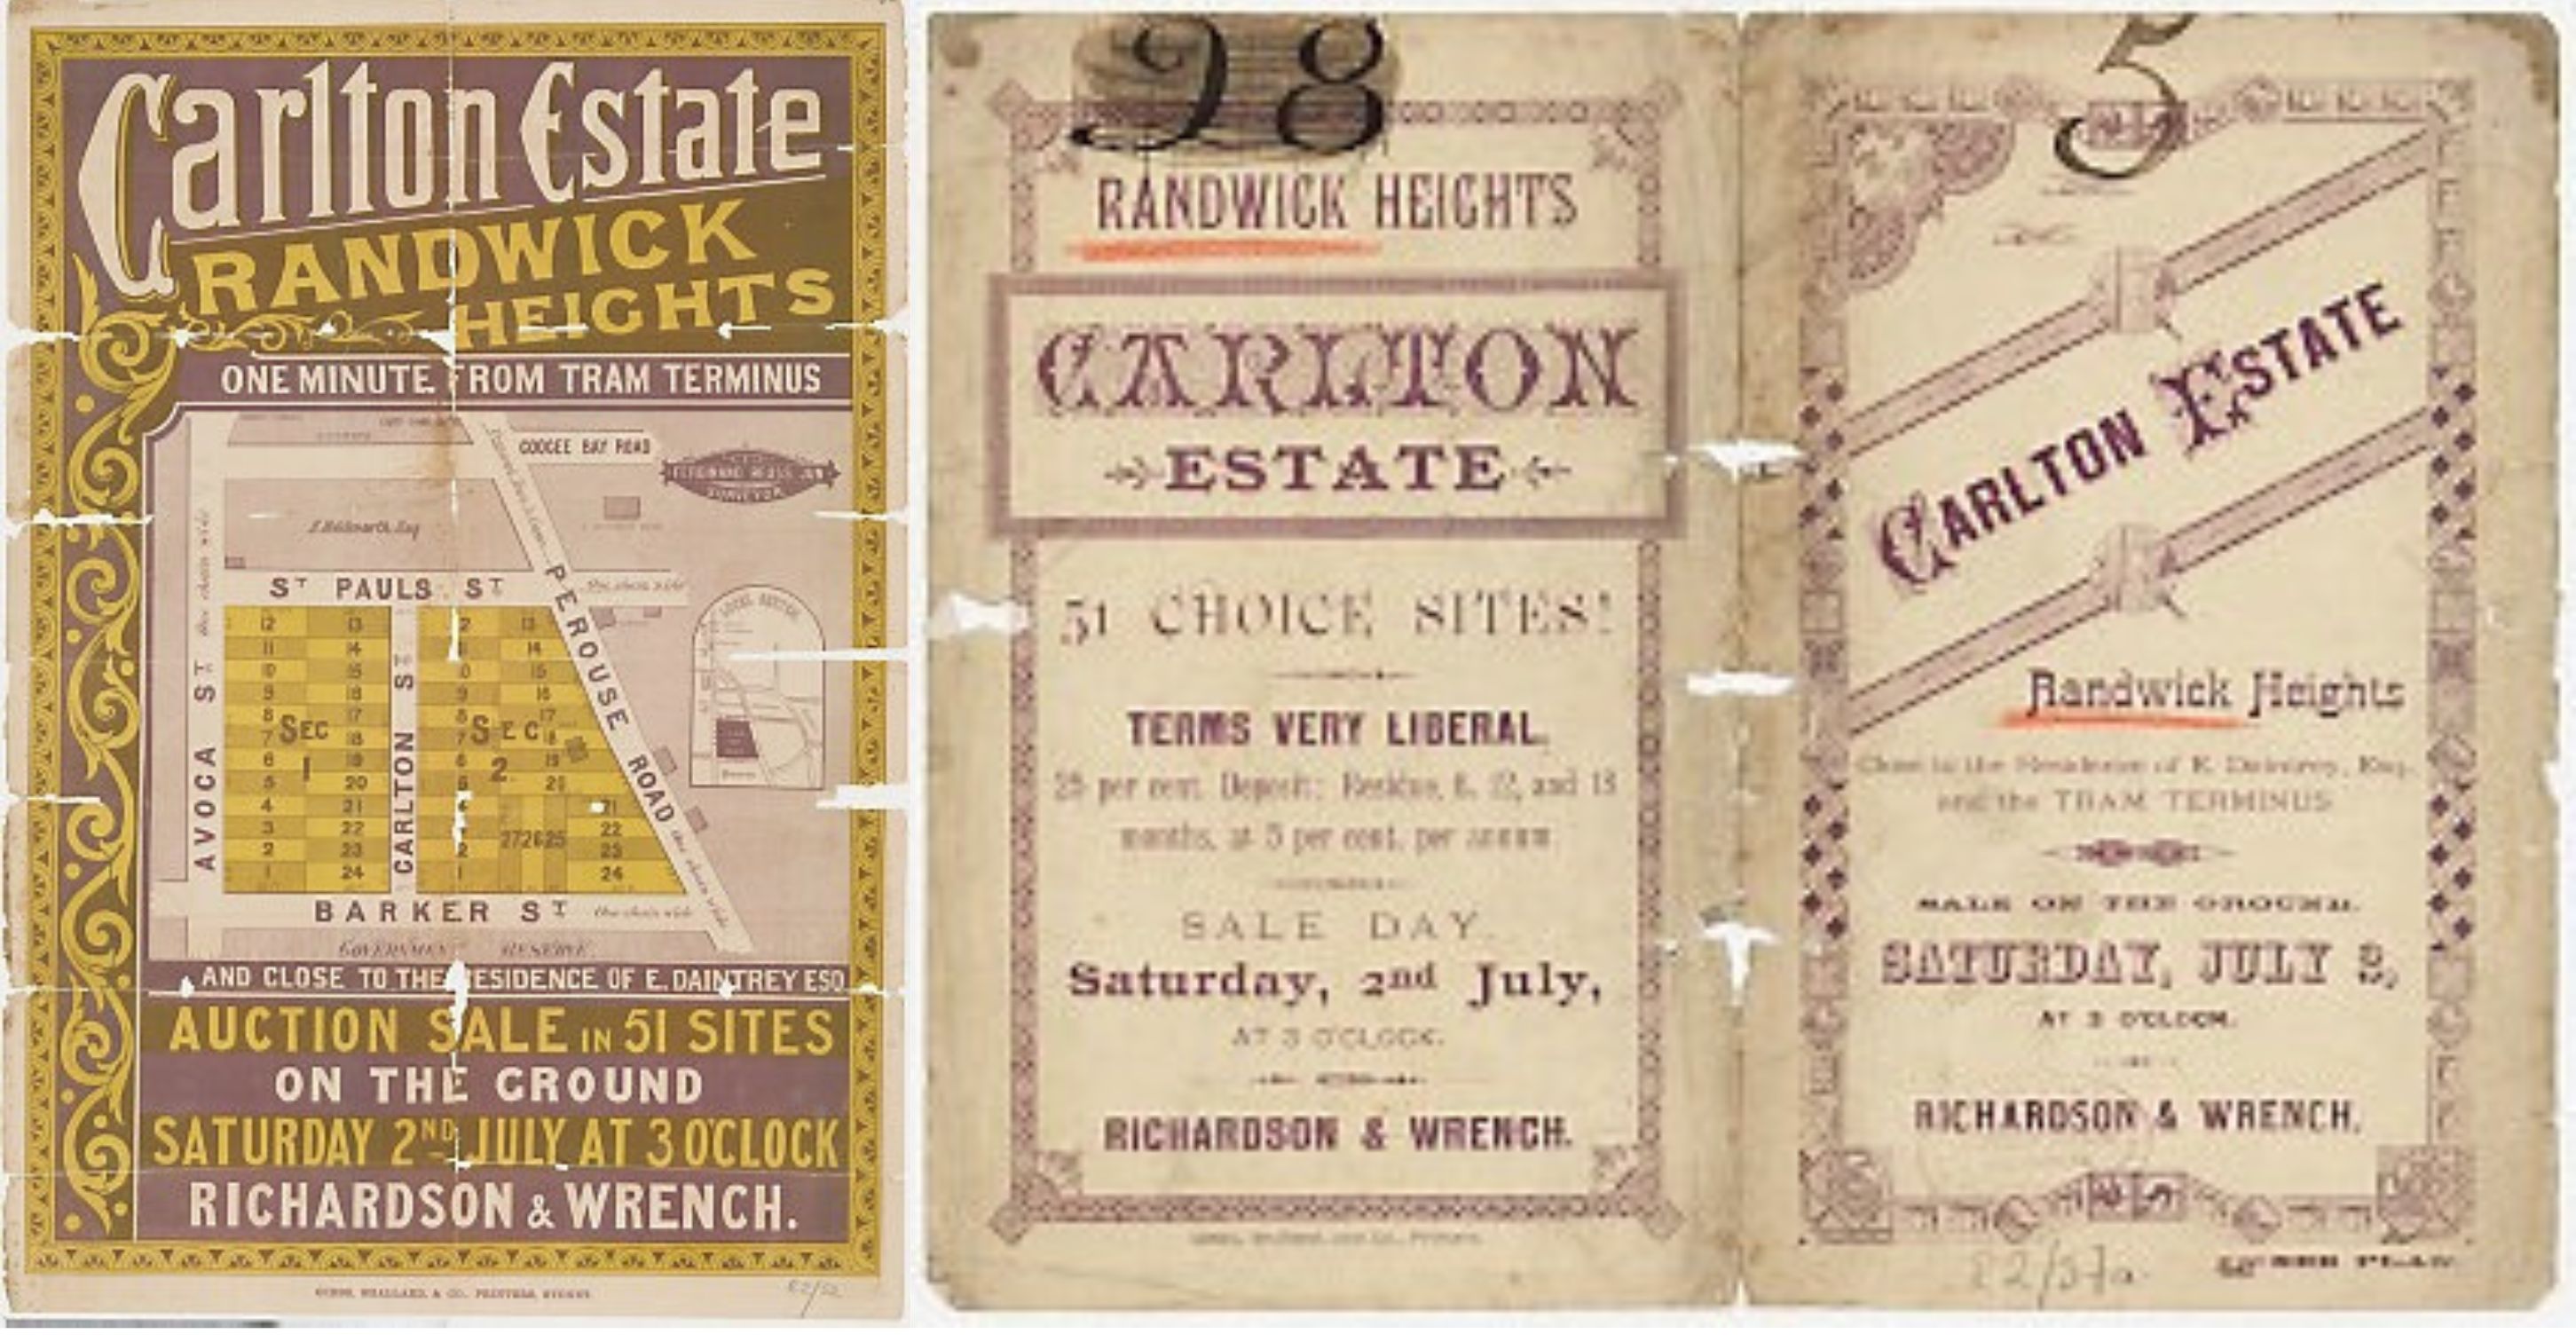 Images of a poster advertising a land auction in, what is referred to as, Randwick Heights. Picture courtesy of the State Library of NSW. Adjacent, two-fold image of an advertisement for a land sale of Carlton Estate in Randwick Heights.